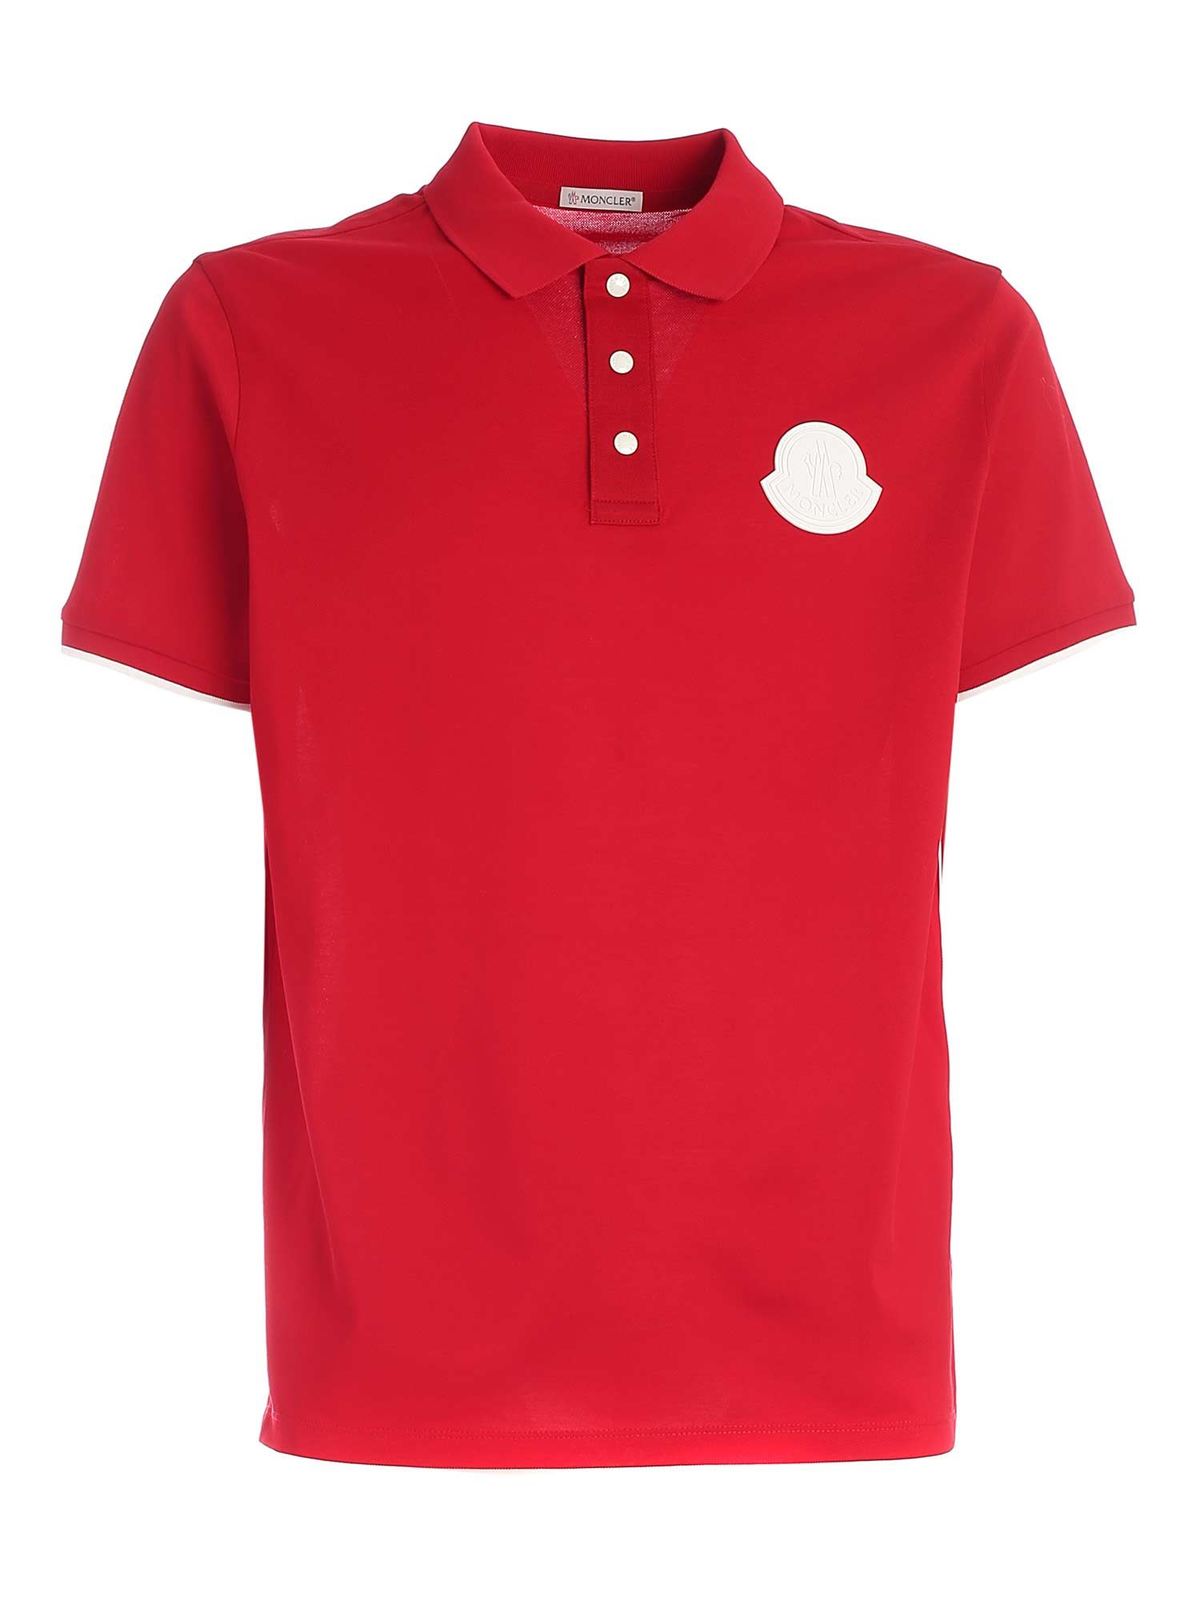 Maxi logo patch polo shirt in red